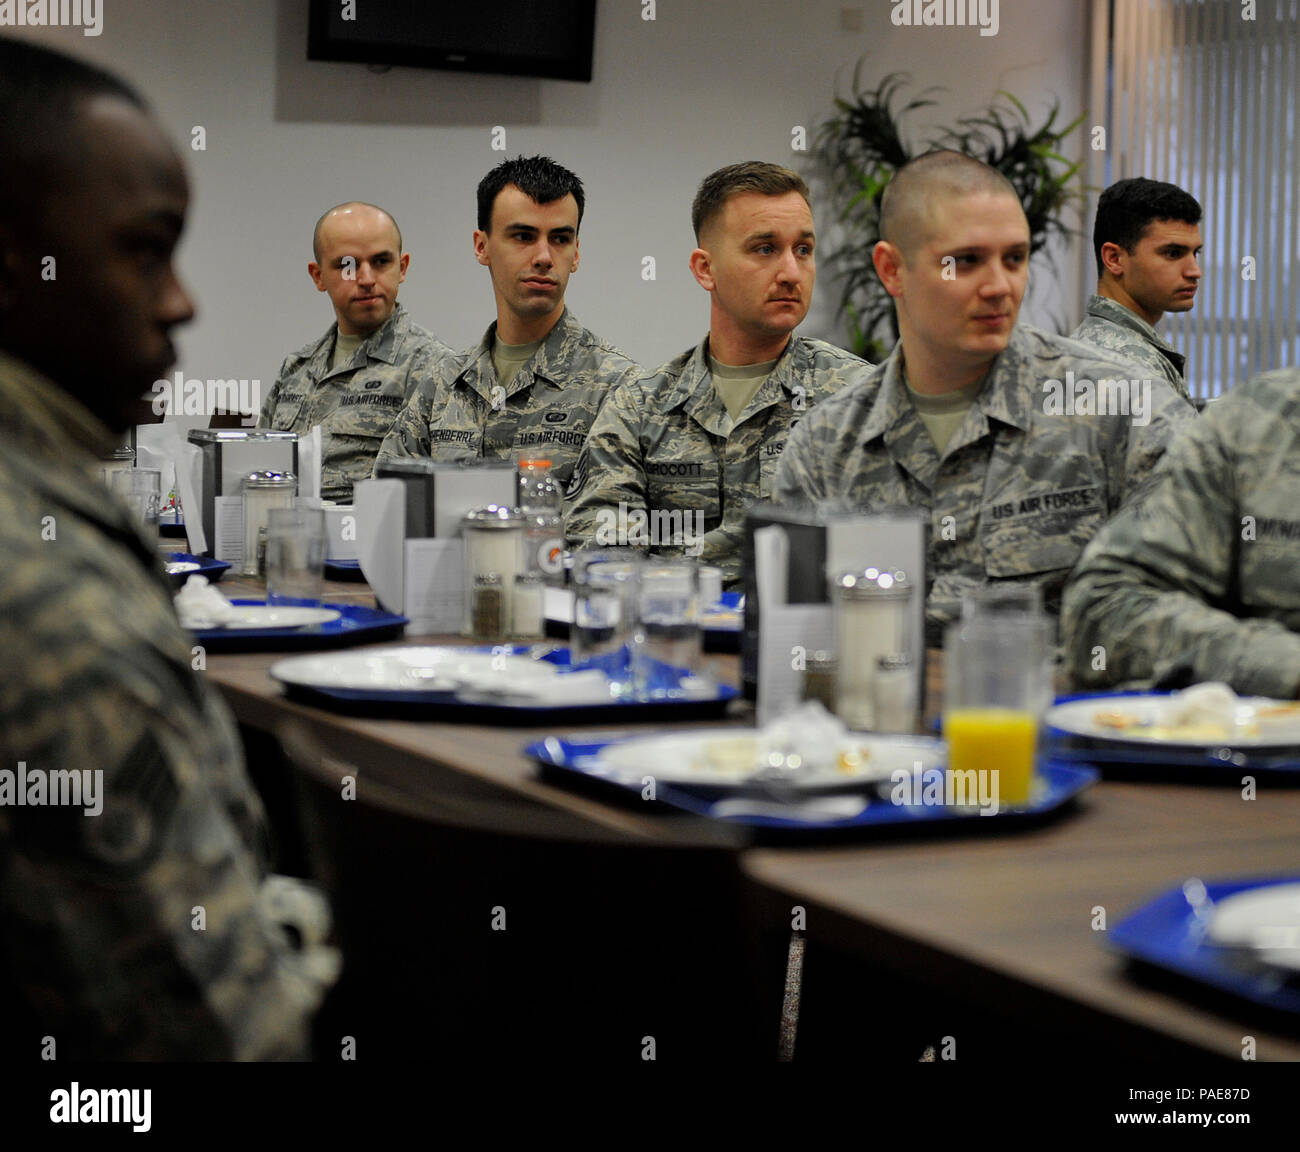 Airmen listen as Chief Master Sgt. Phillip L. Easton, 86th Airlift Wing command chief, tells Airmen about his experiences during an enlisted breakfast March 11, 2016, at Kapaun Air Station, Germany. Airmen met with Easton and learned the importance of the whole-Airman concept. (U.S. Air Force photo/Airman 1st Class Larissa Greatwood) Stock Photo